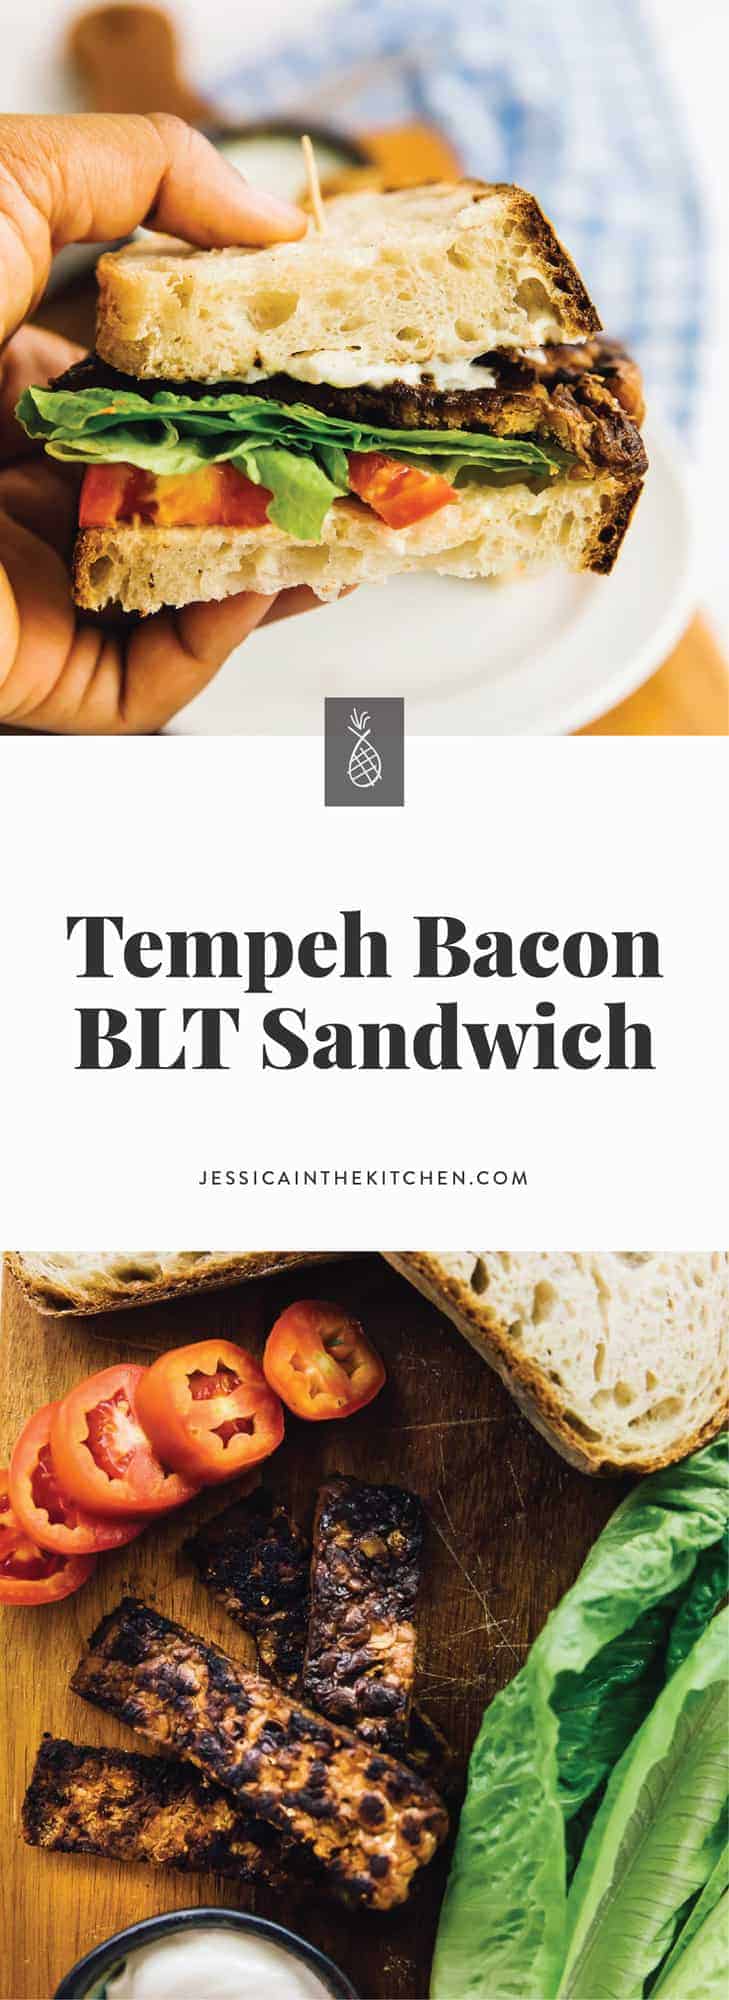 This Tempeh Bacon BLT Sandwich is loaded with lots of meaty flavour! It's perfect for quick lunches and dinners and you can use the tempeh bacon in so many ways! via https://jessicainthekitchen.com